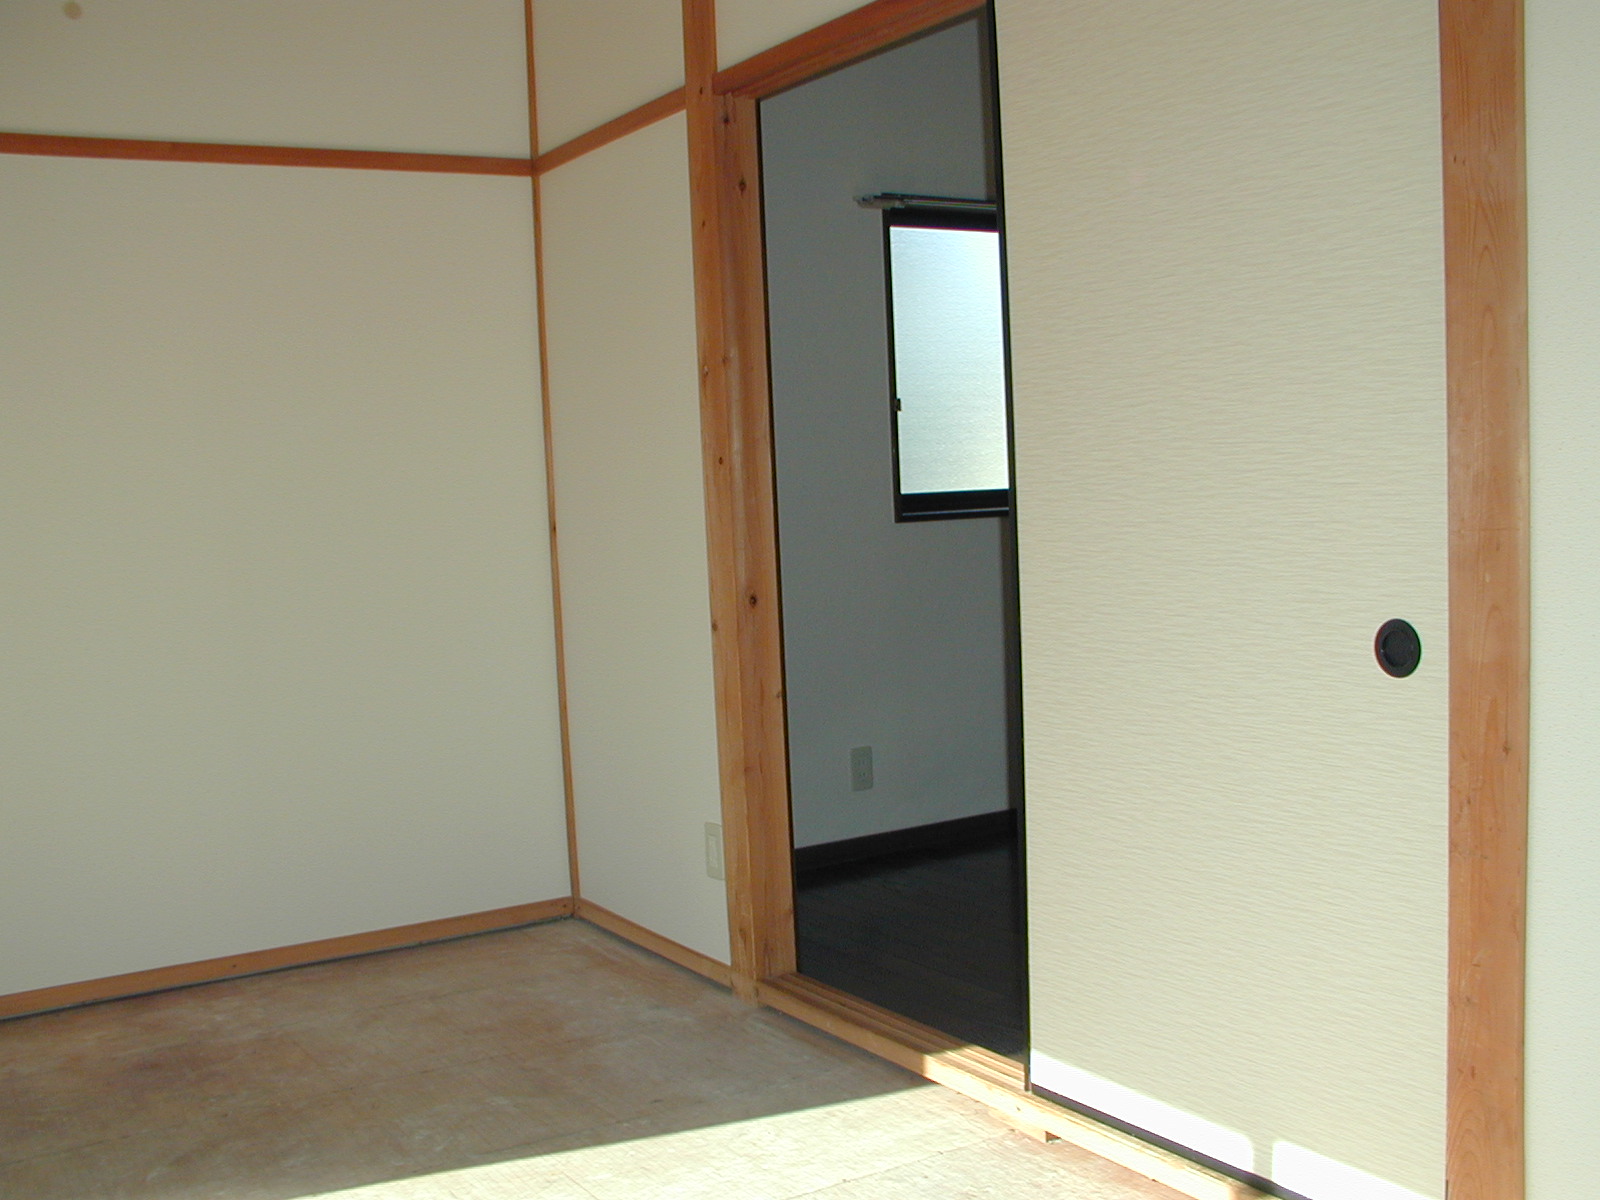 Living and room. Sliding door has also become clean